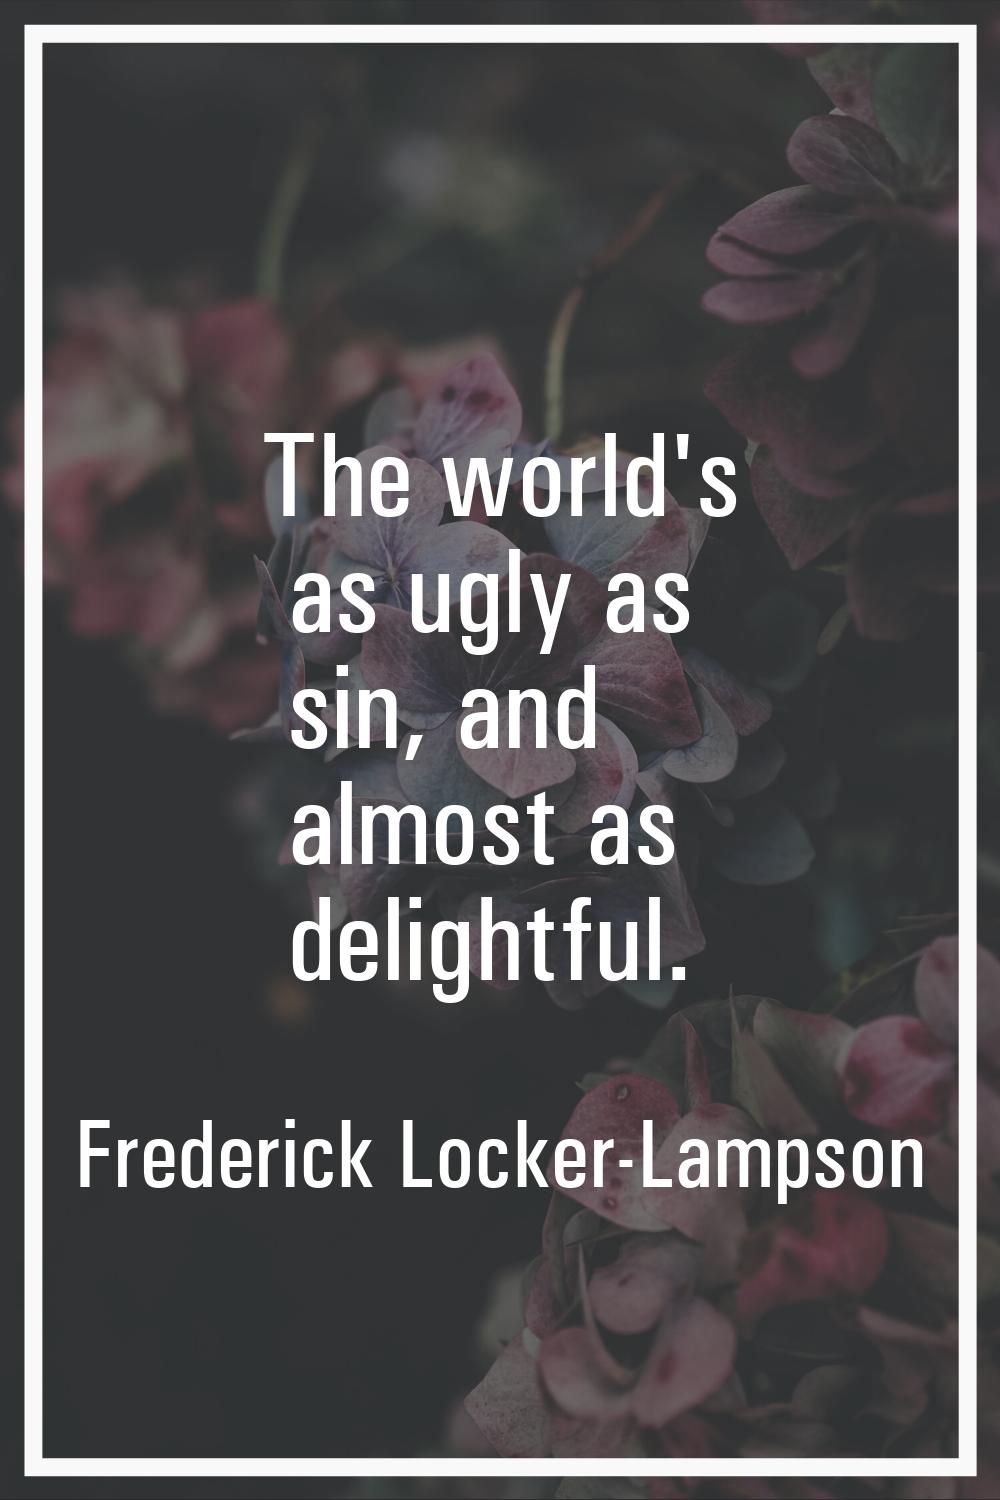 The world's as ugly as sin, and almost as delightful.